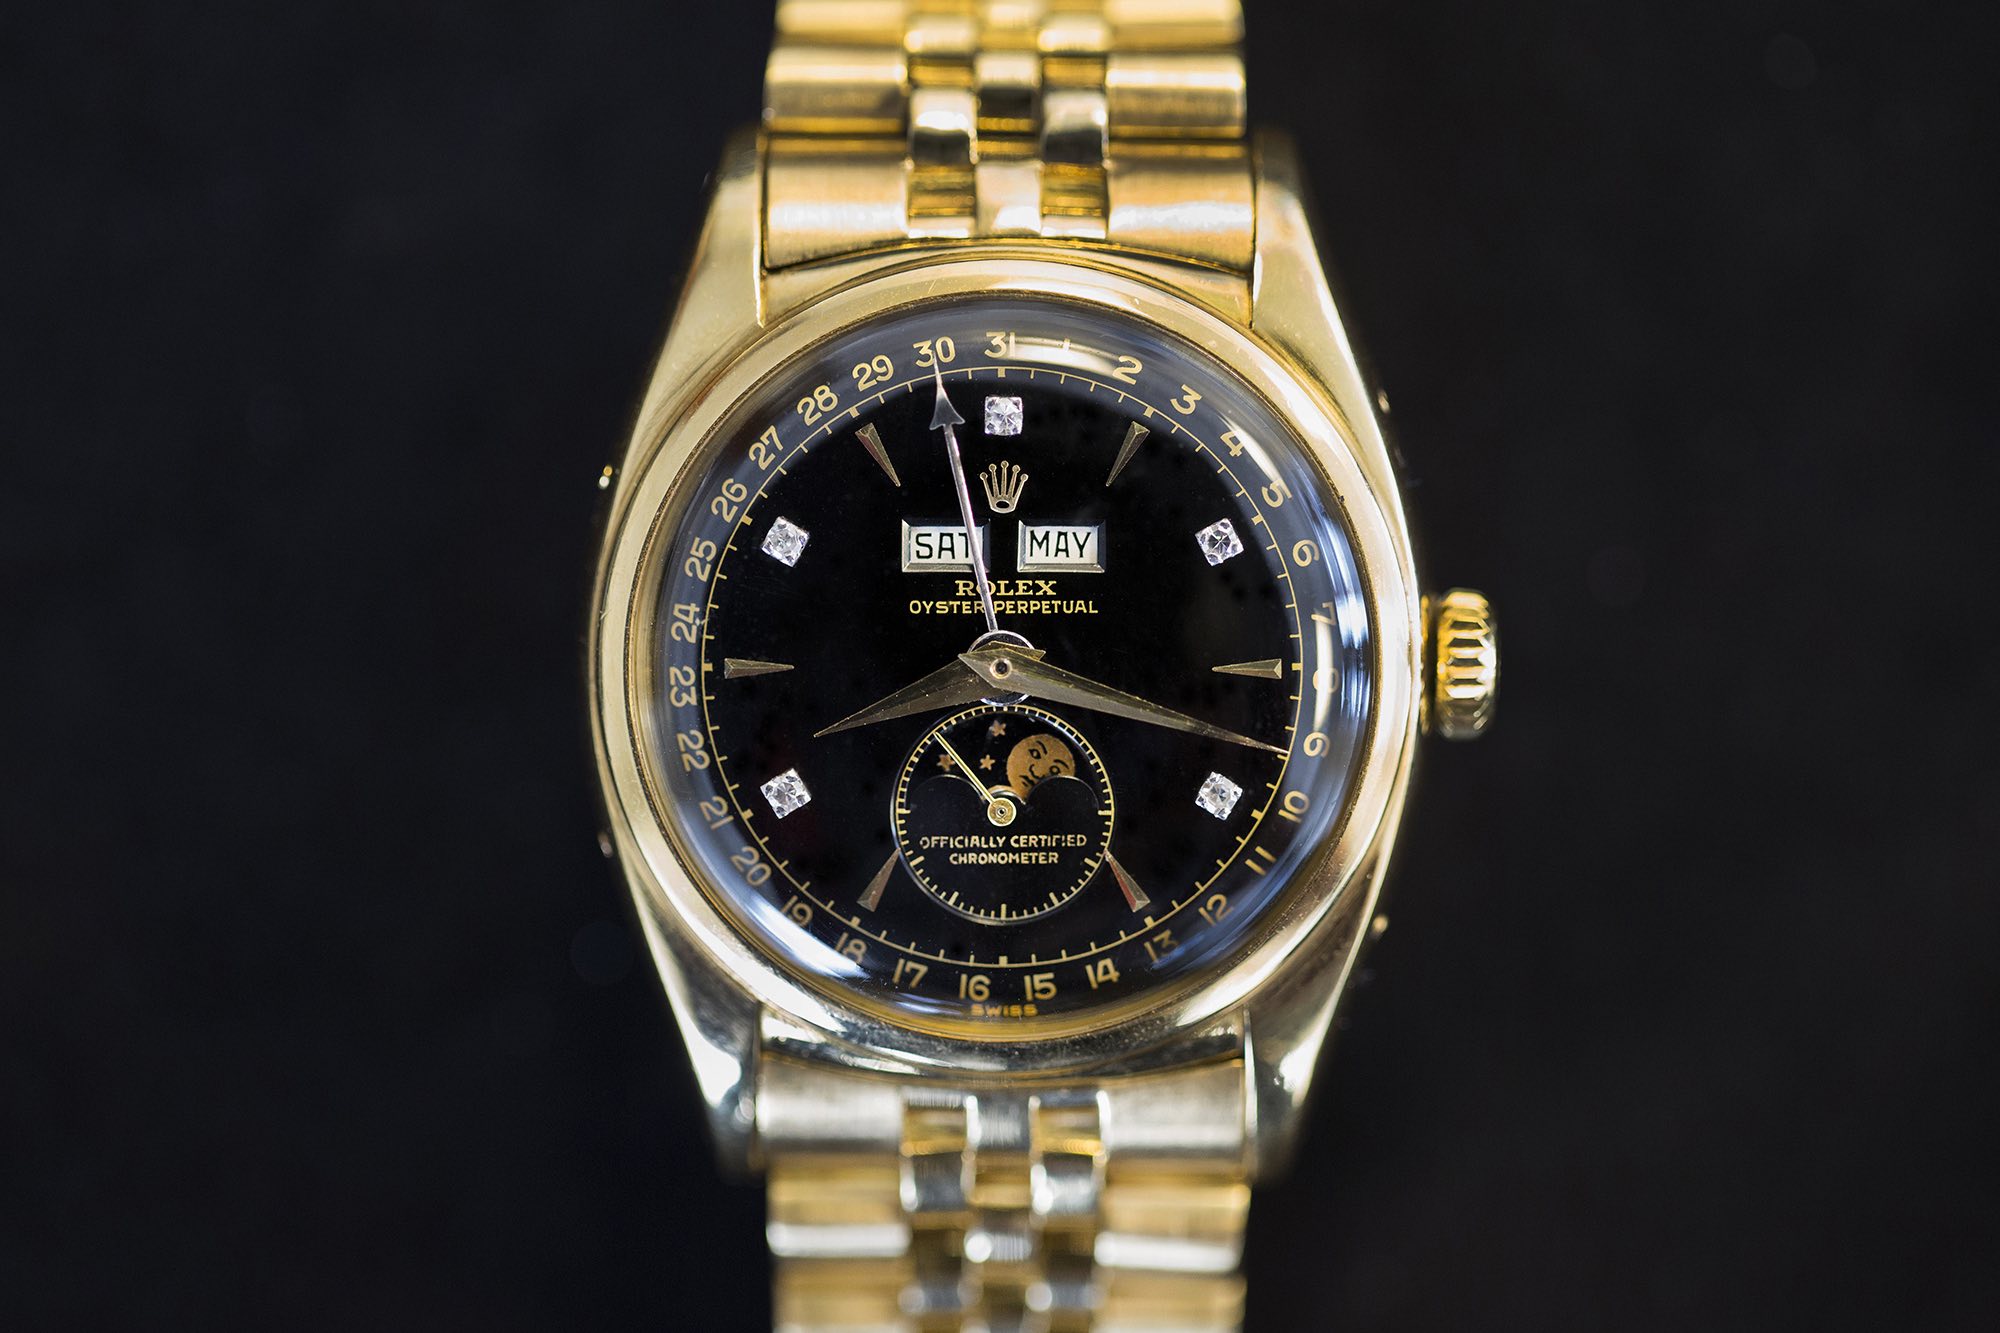 Could This Be the World’s Most Expensive Rolex?